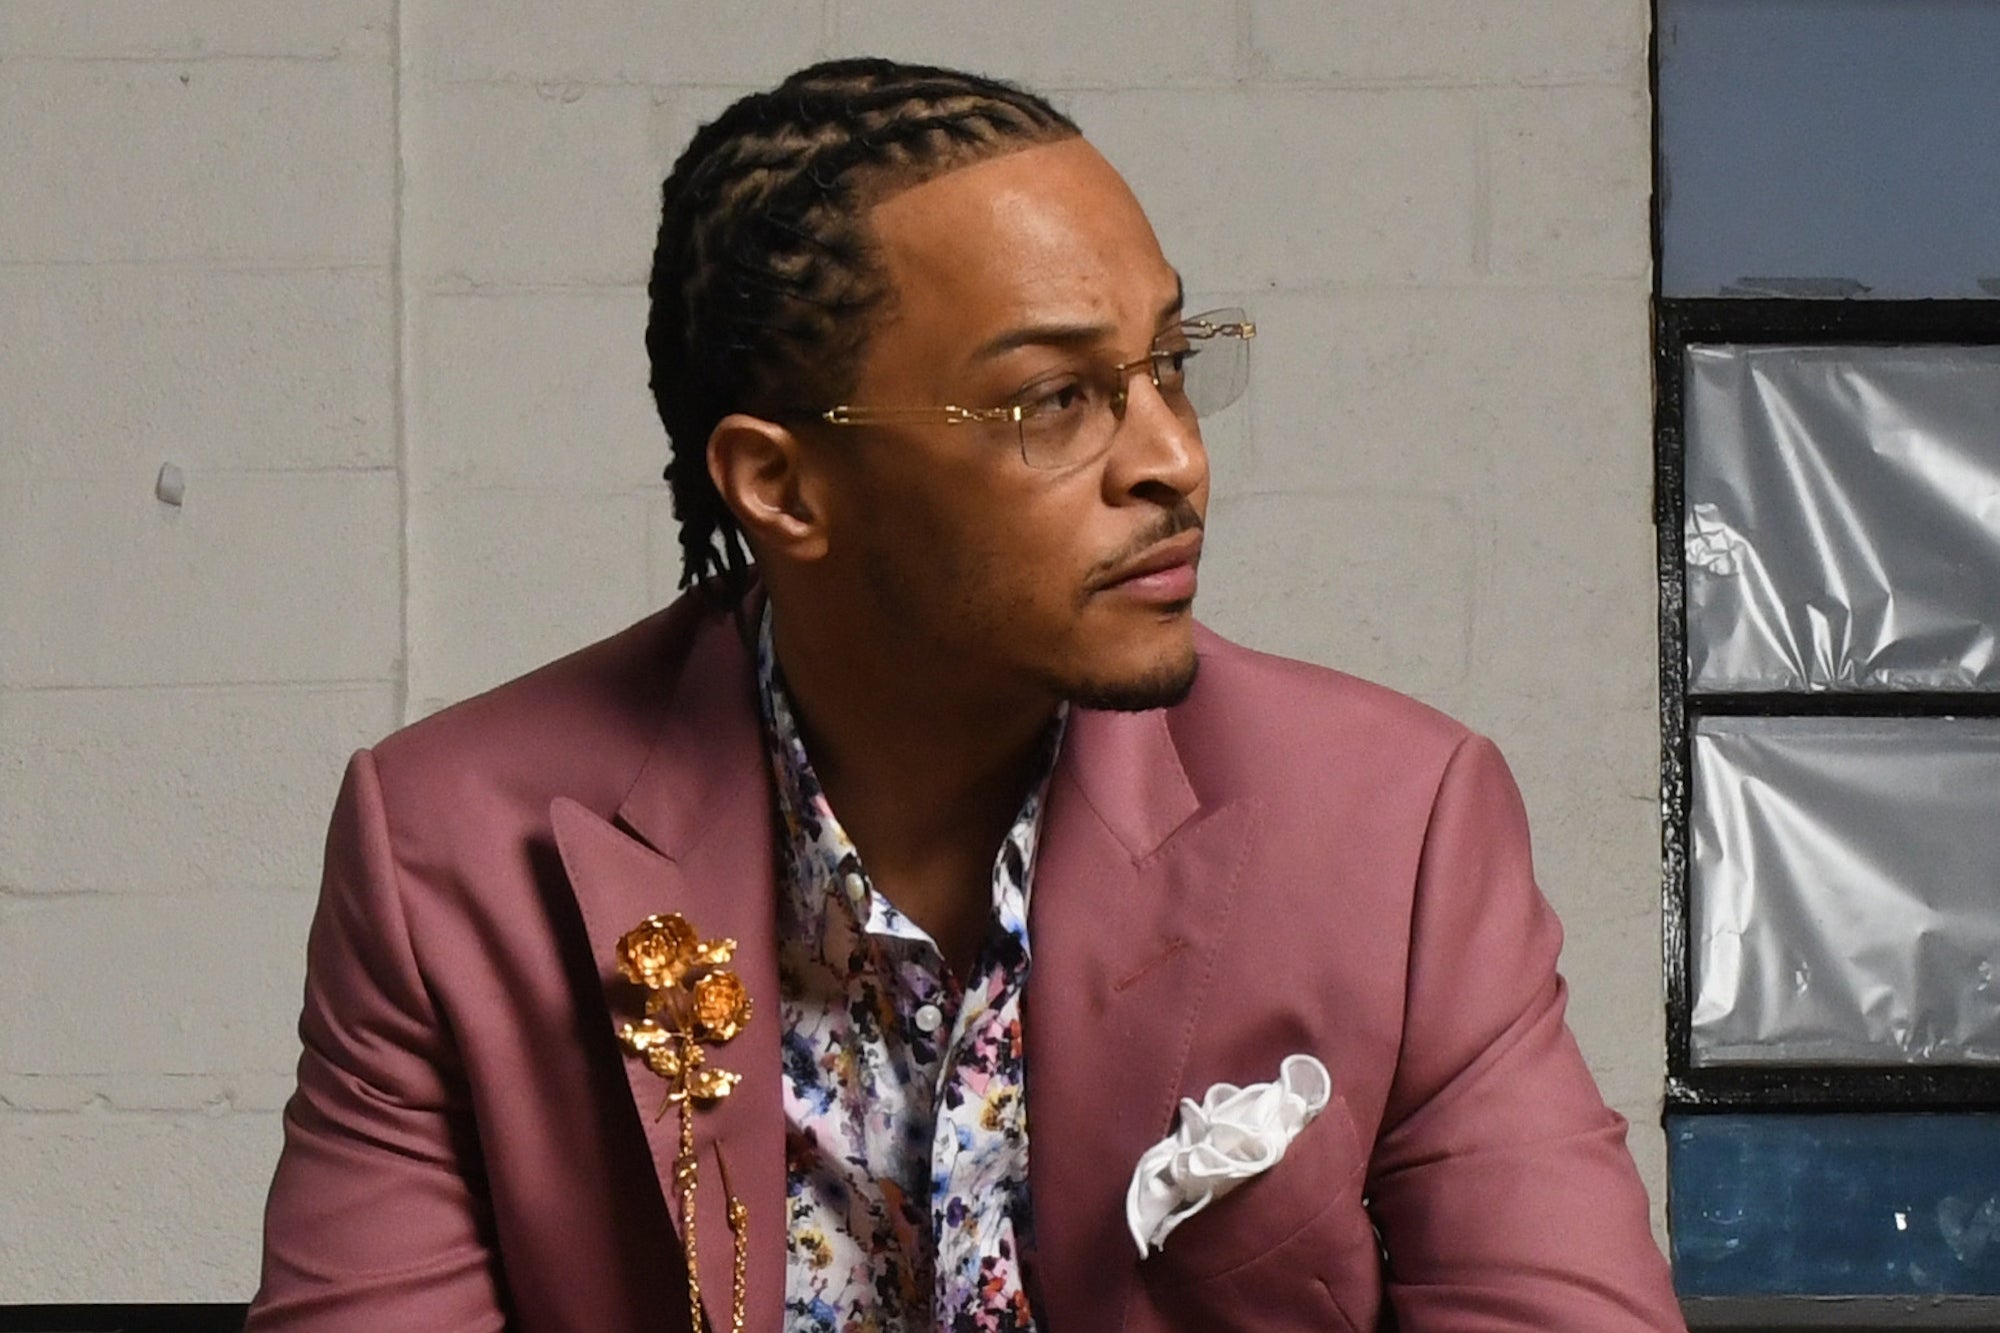 T.I. Talks About His Partnership With CIGNATURE and How You Can Find Your Next Great Idea